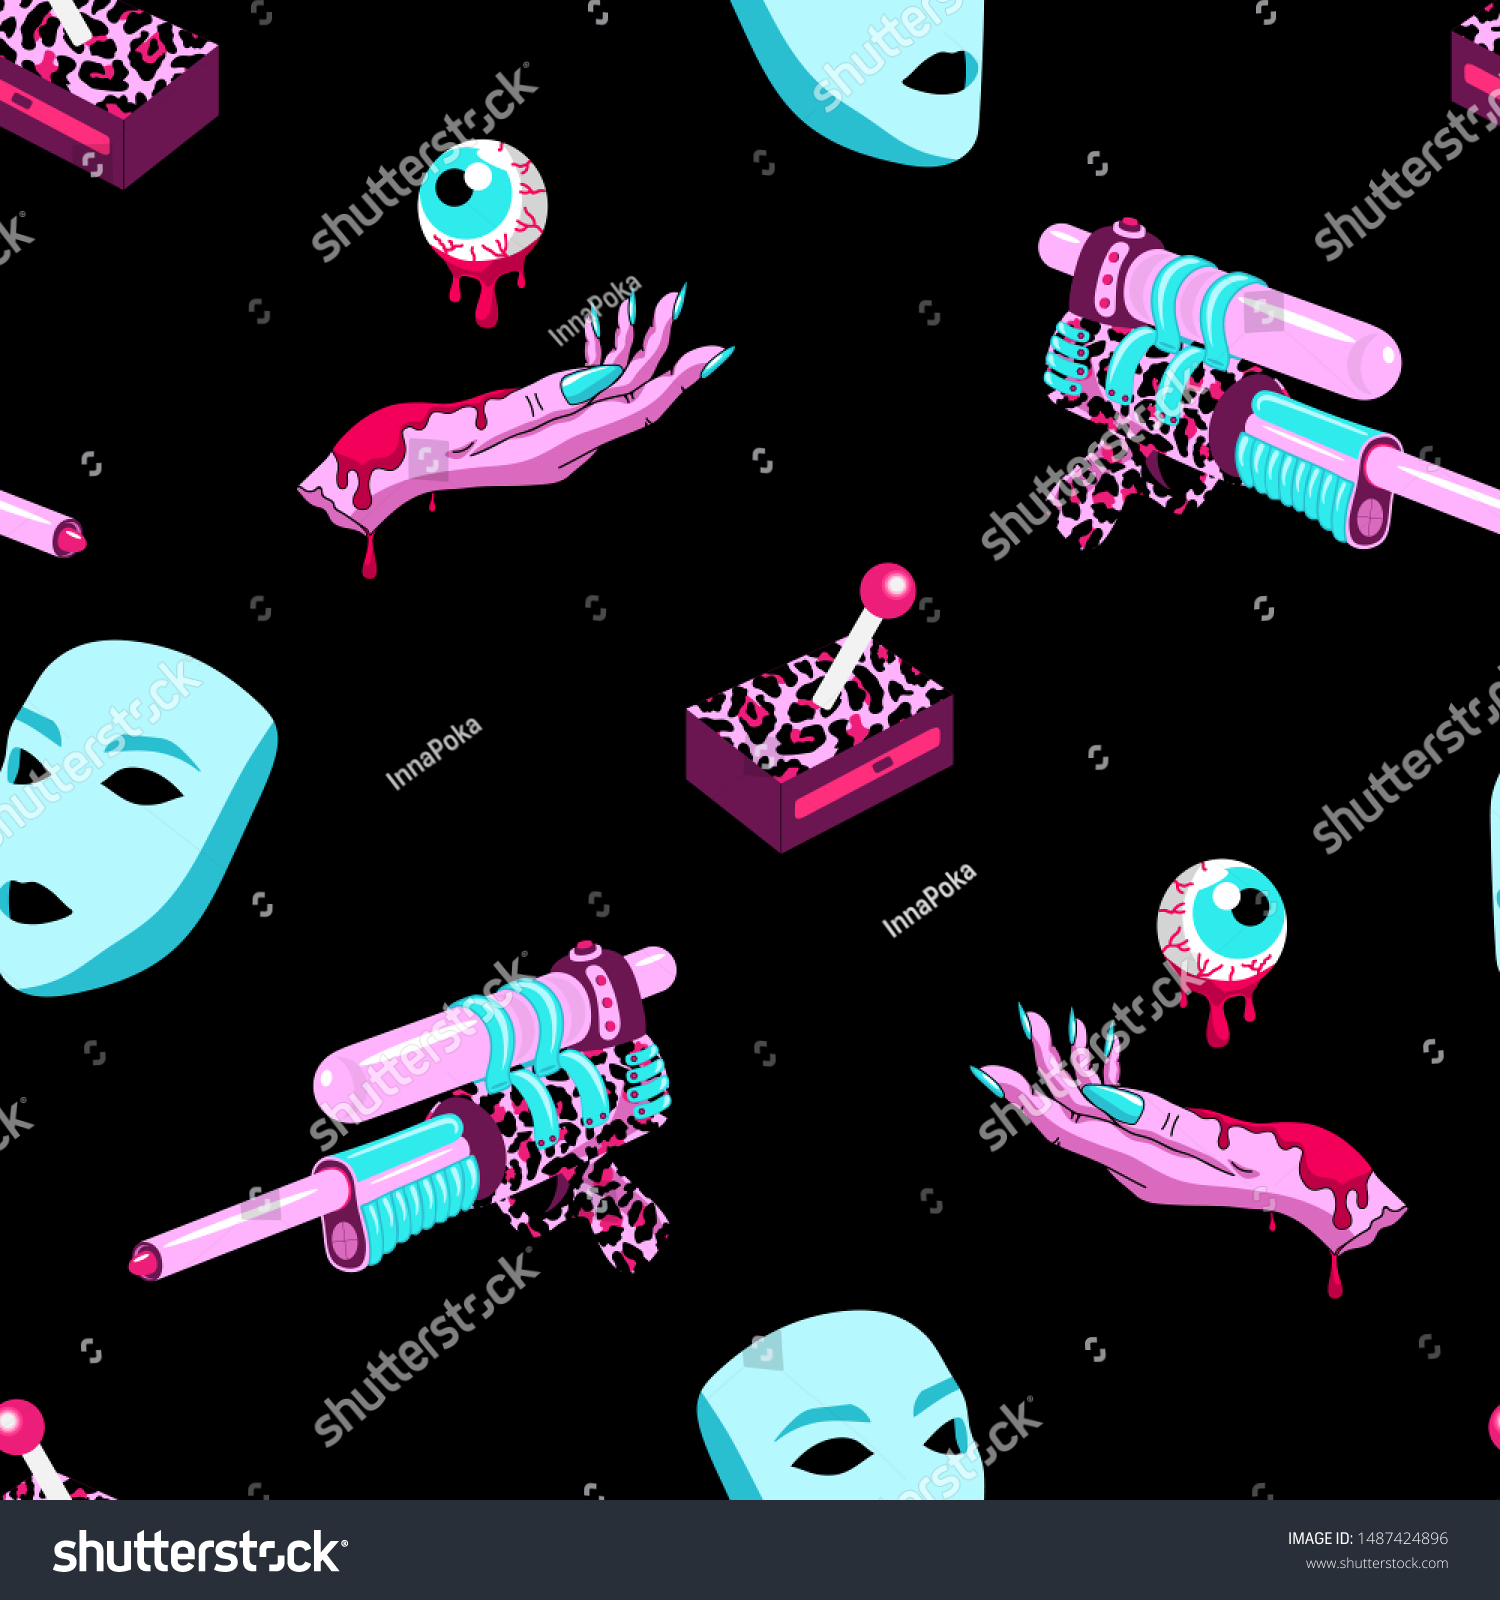 Halloween Scifi Cosmic Outer Space Vector Stock Royalty